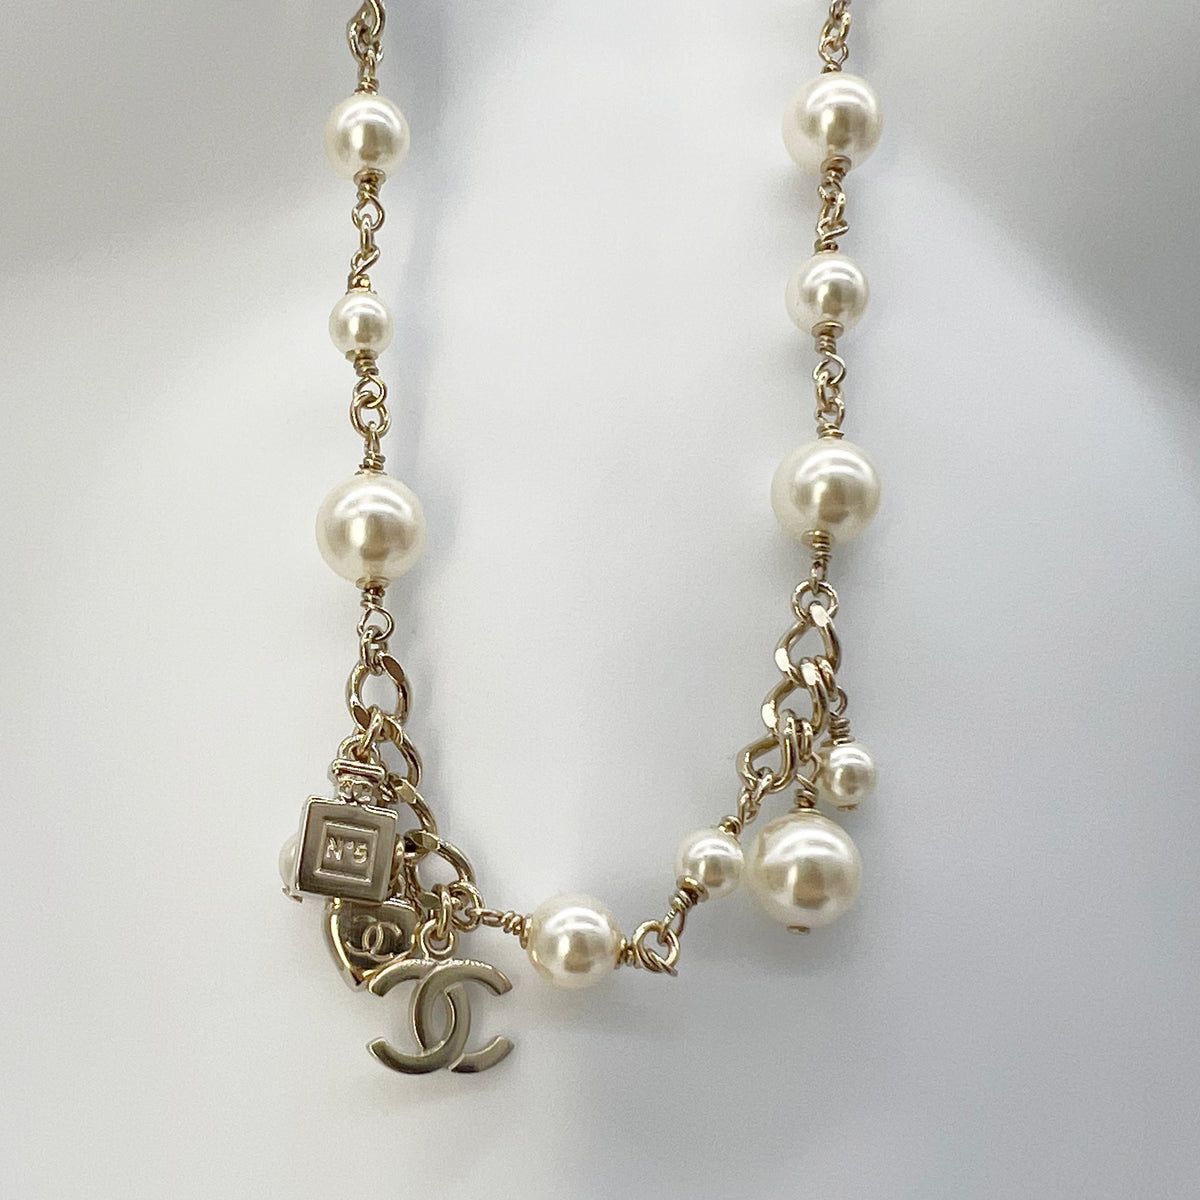 Chanel CC Faux Pearl Necklace Off-White Light Gold